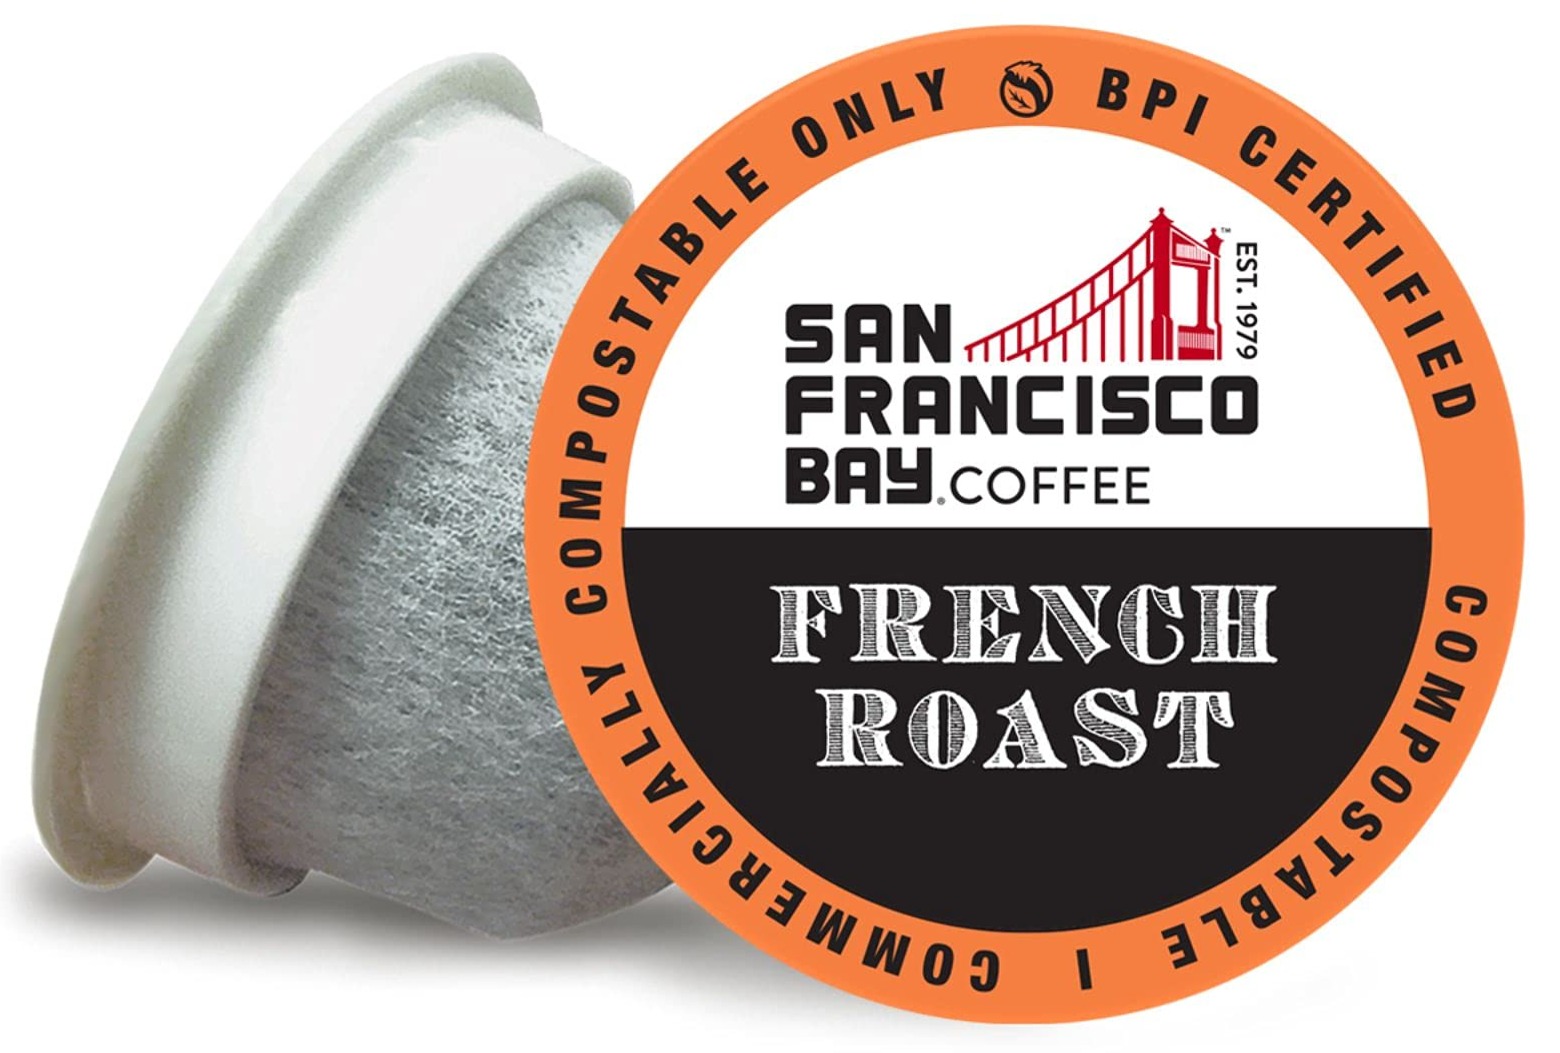 San Francisco Bay Compostable Coffee Pods - French Roast (80 Ct) K Cup Compatible including Keurig 2.0, Dark Roast, $21.59 - as low as $18.71 w/5 S&S items